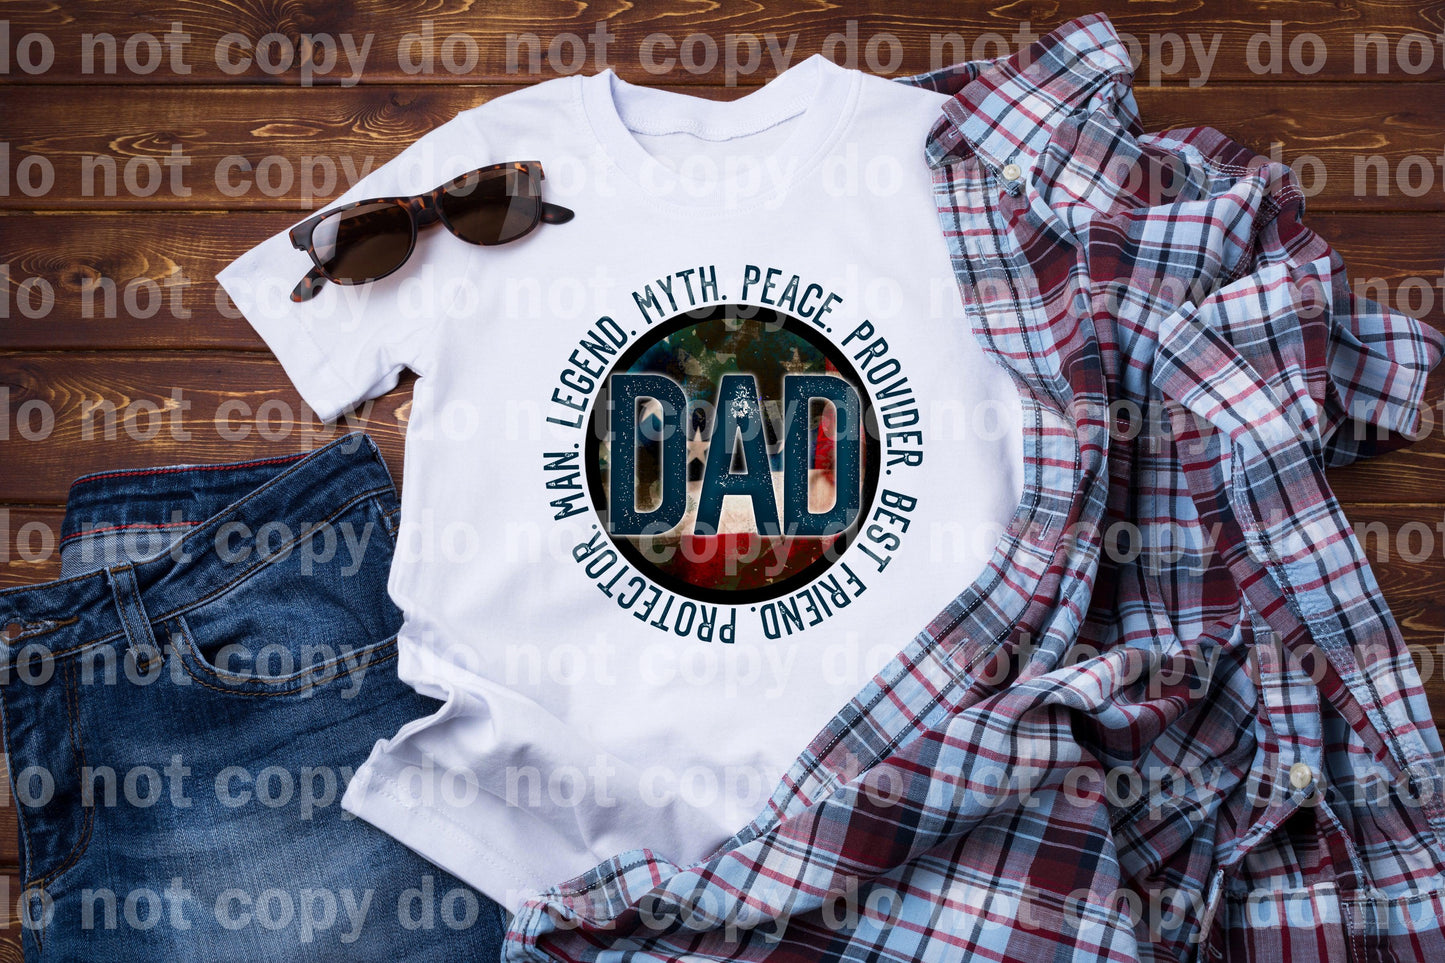 Man Legend Myth Peace Provider Best Friend Protector Dad Circle Dream Print or Sublimation Print